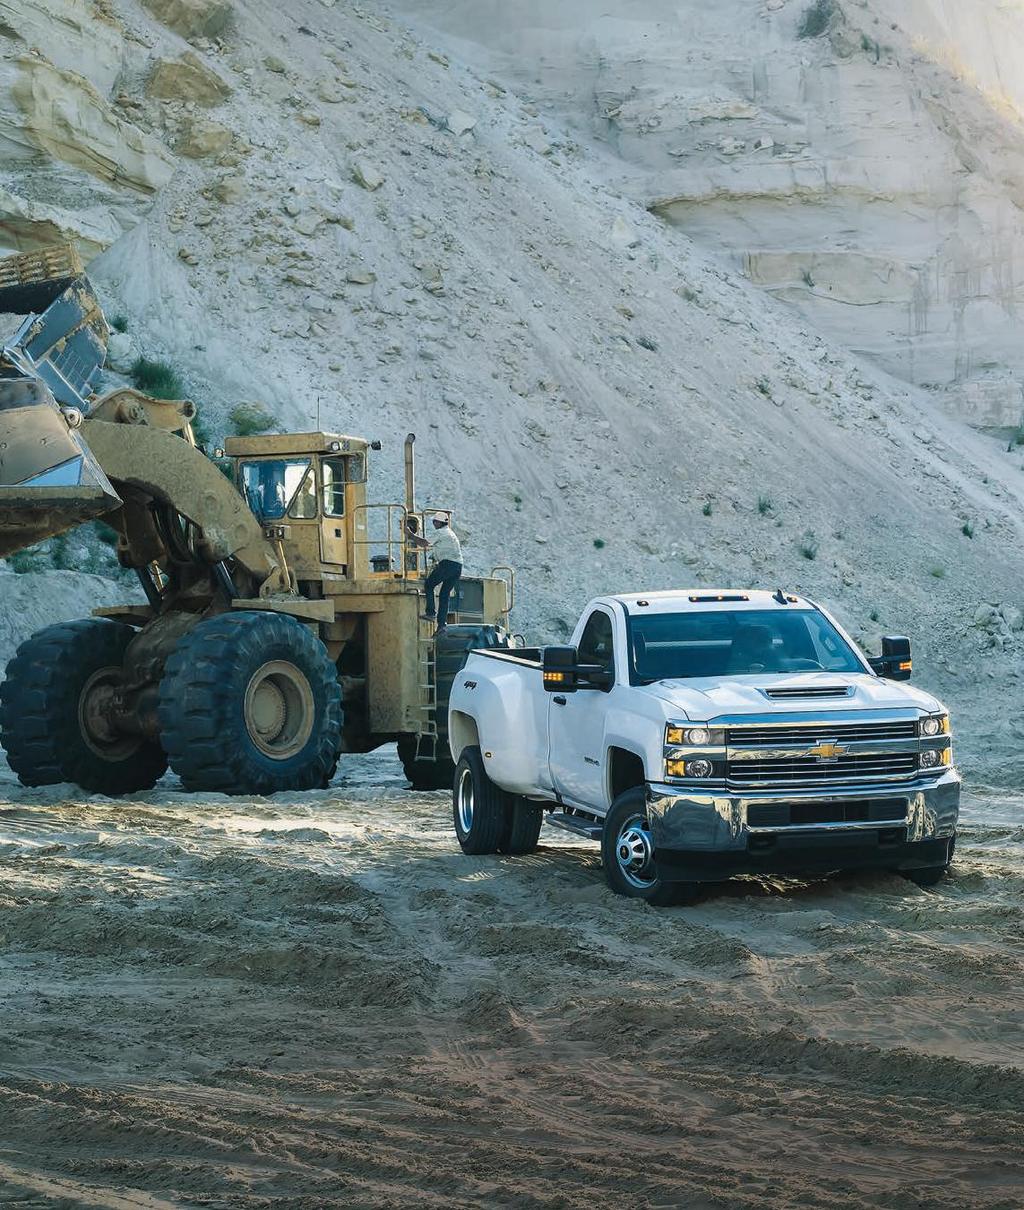 TRUCKS YOU CAN COUNT ON FROM START TO FINISH. For nearly 100 years, Chevy has given small business owners the tools they need to help get the job done.